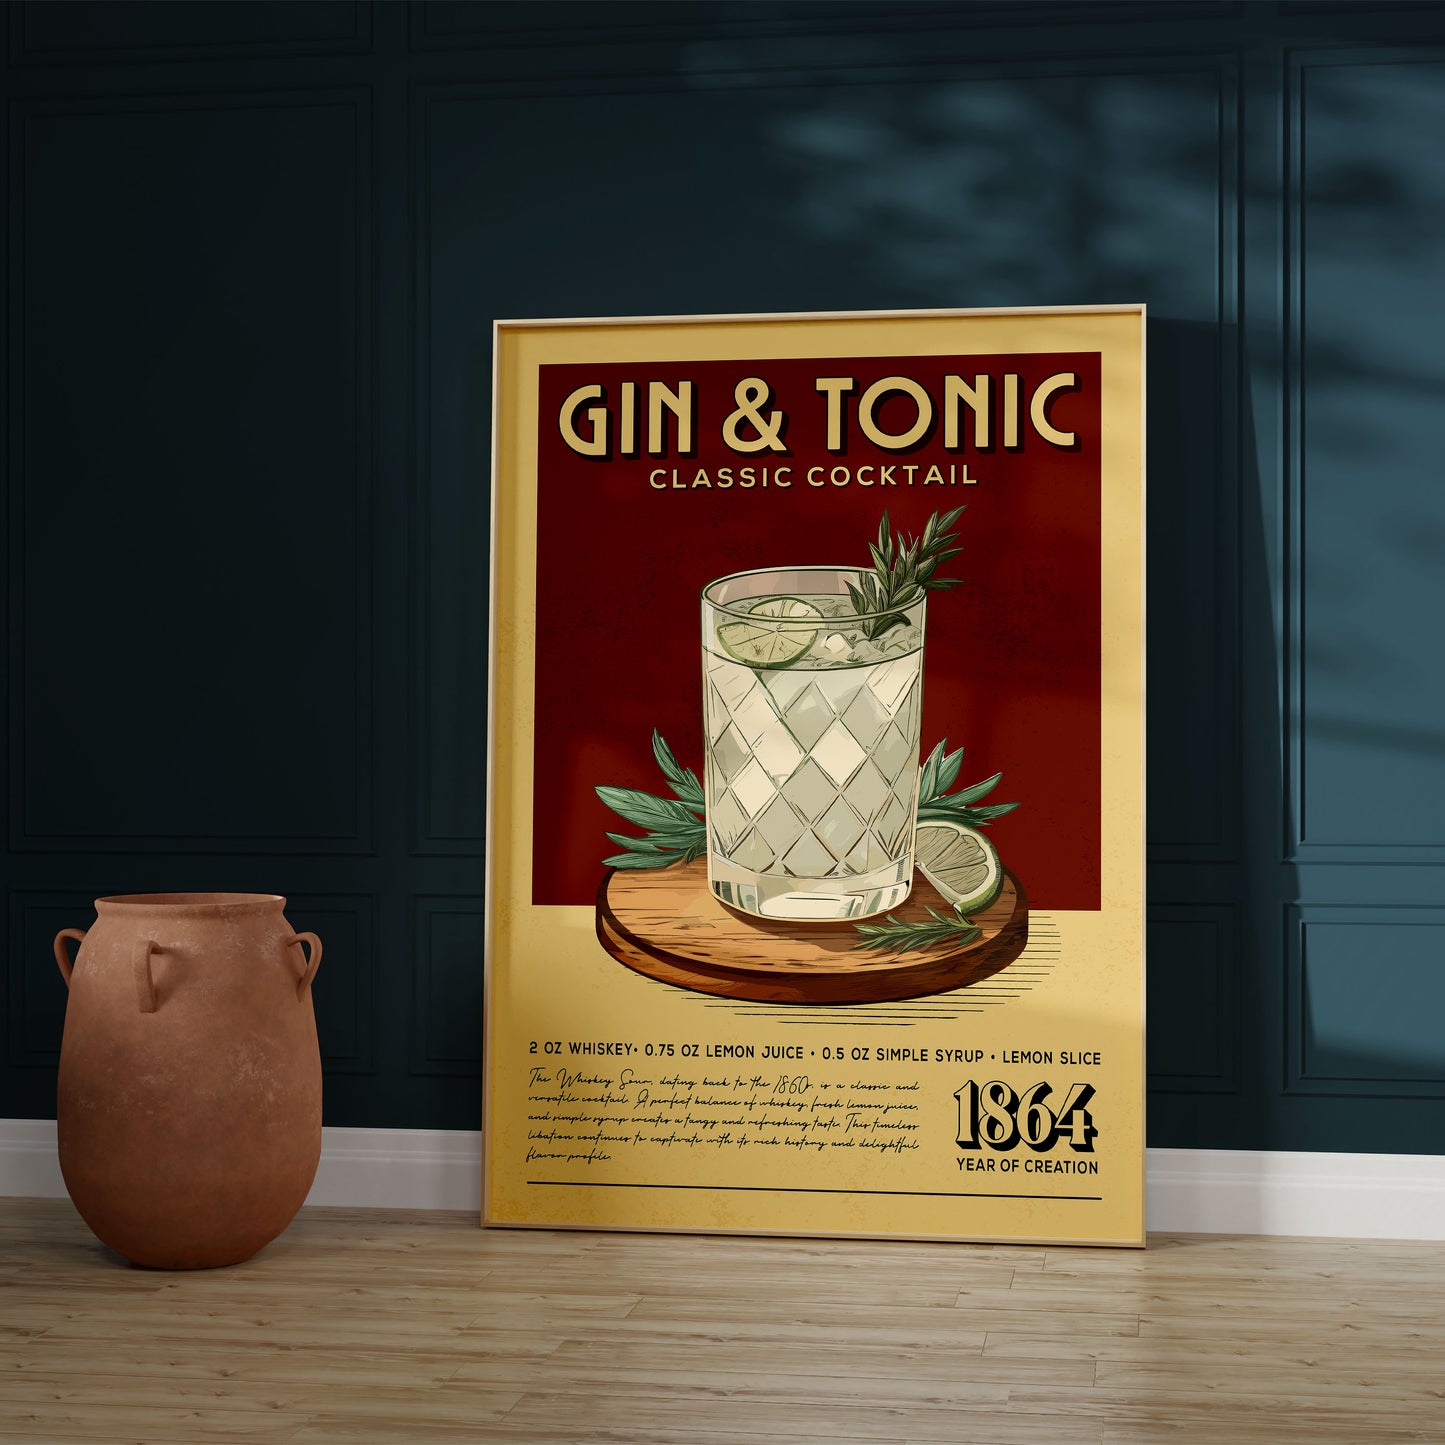 Gin and Tonic - Classic Cocktail Poster